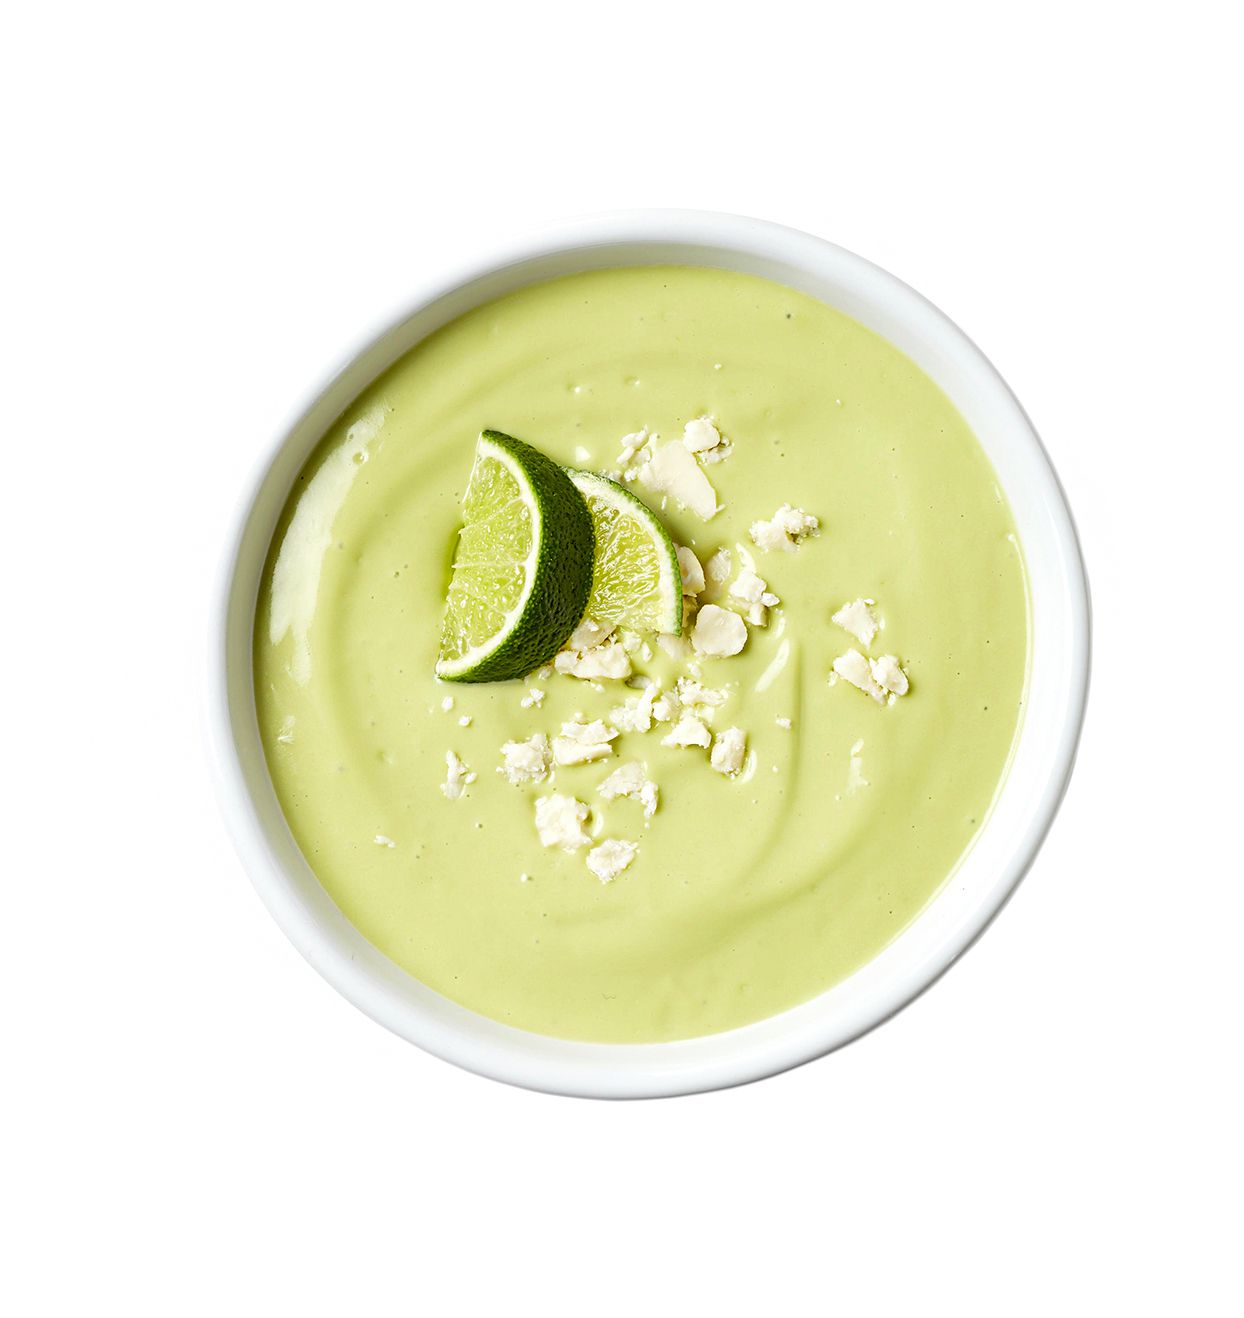 Lunch: Chilled Avocado Soup